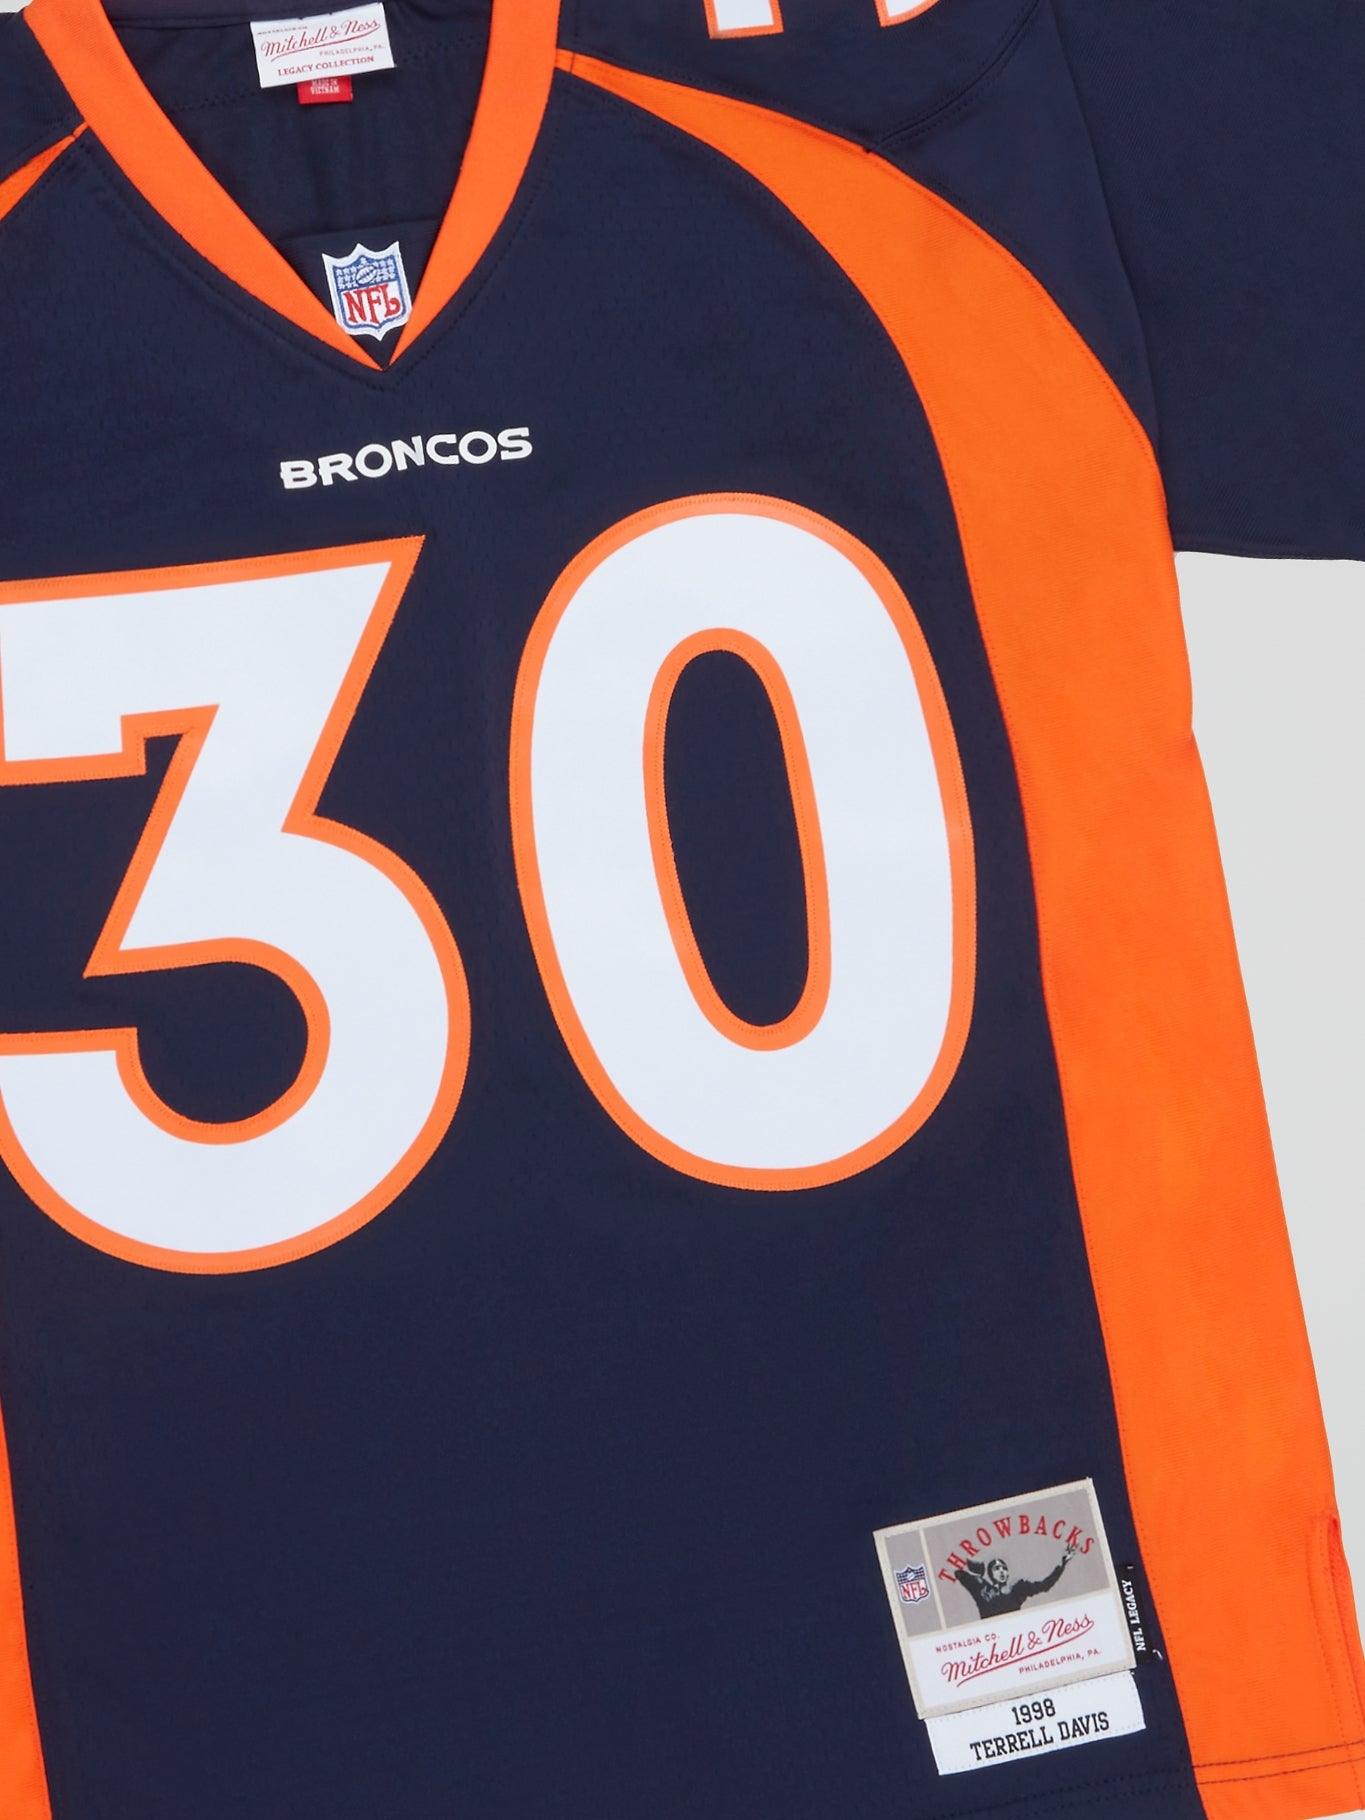 Mitchell and Ness - NFL Legacy Jersey Broncos 1998 Terell Davis